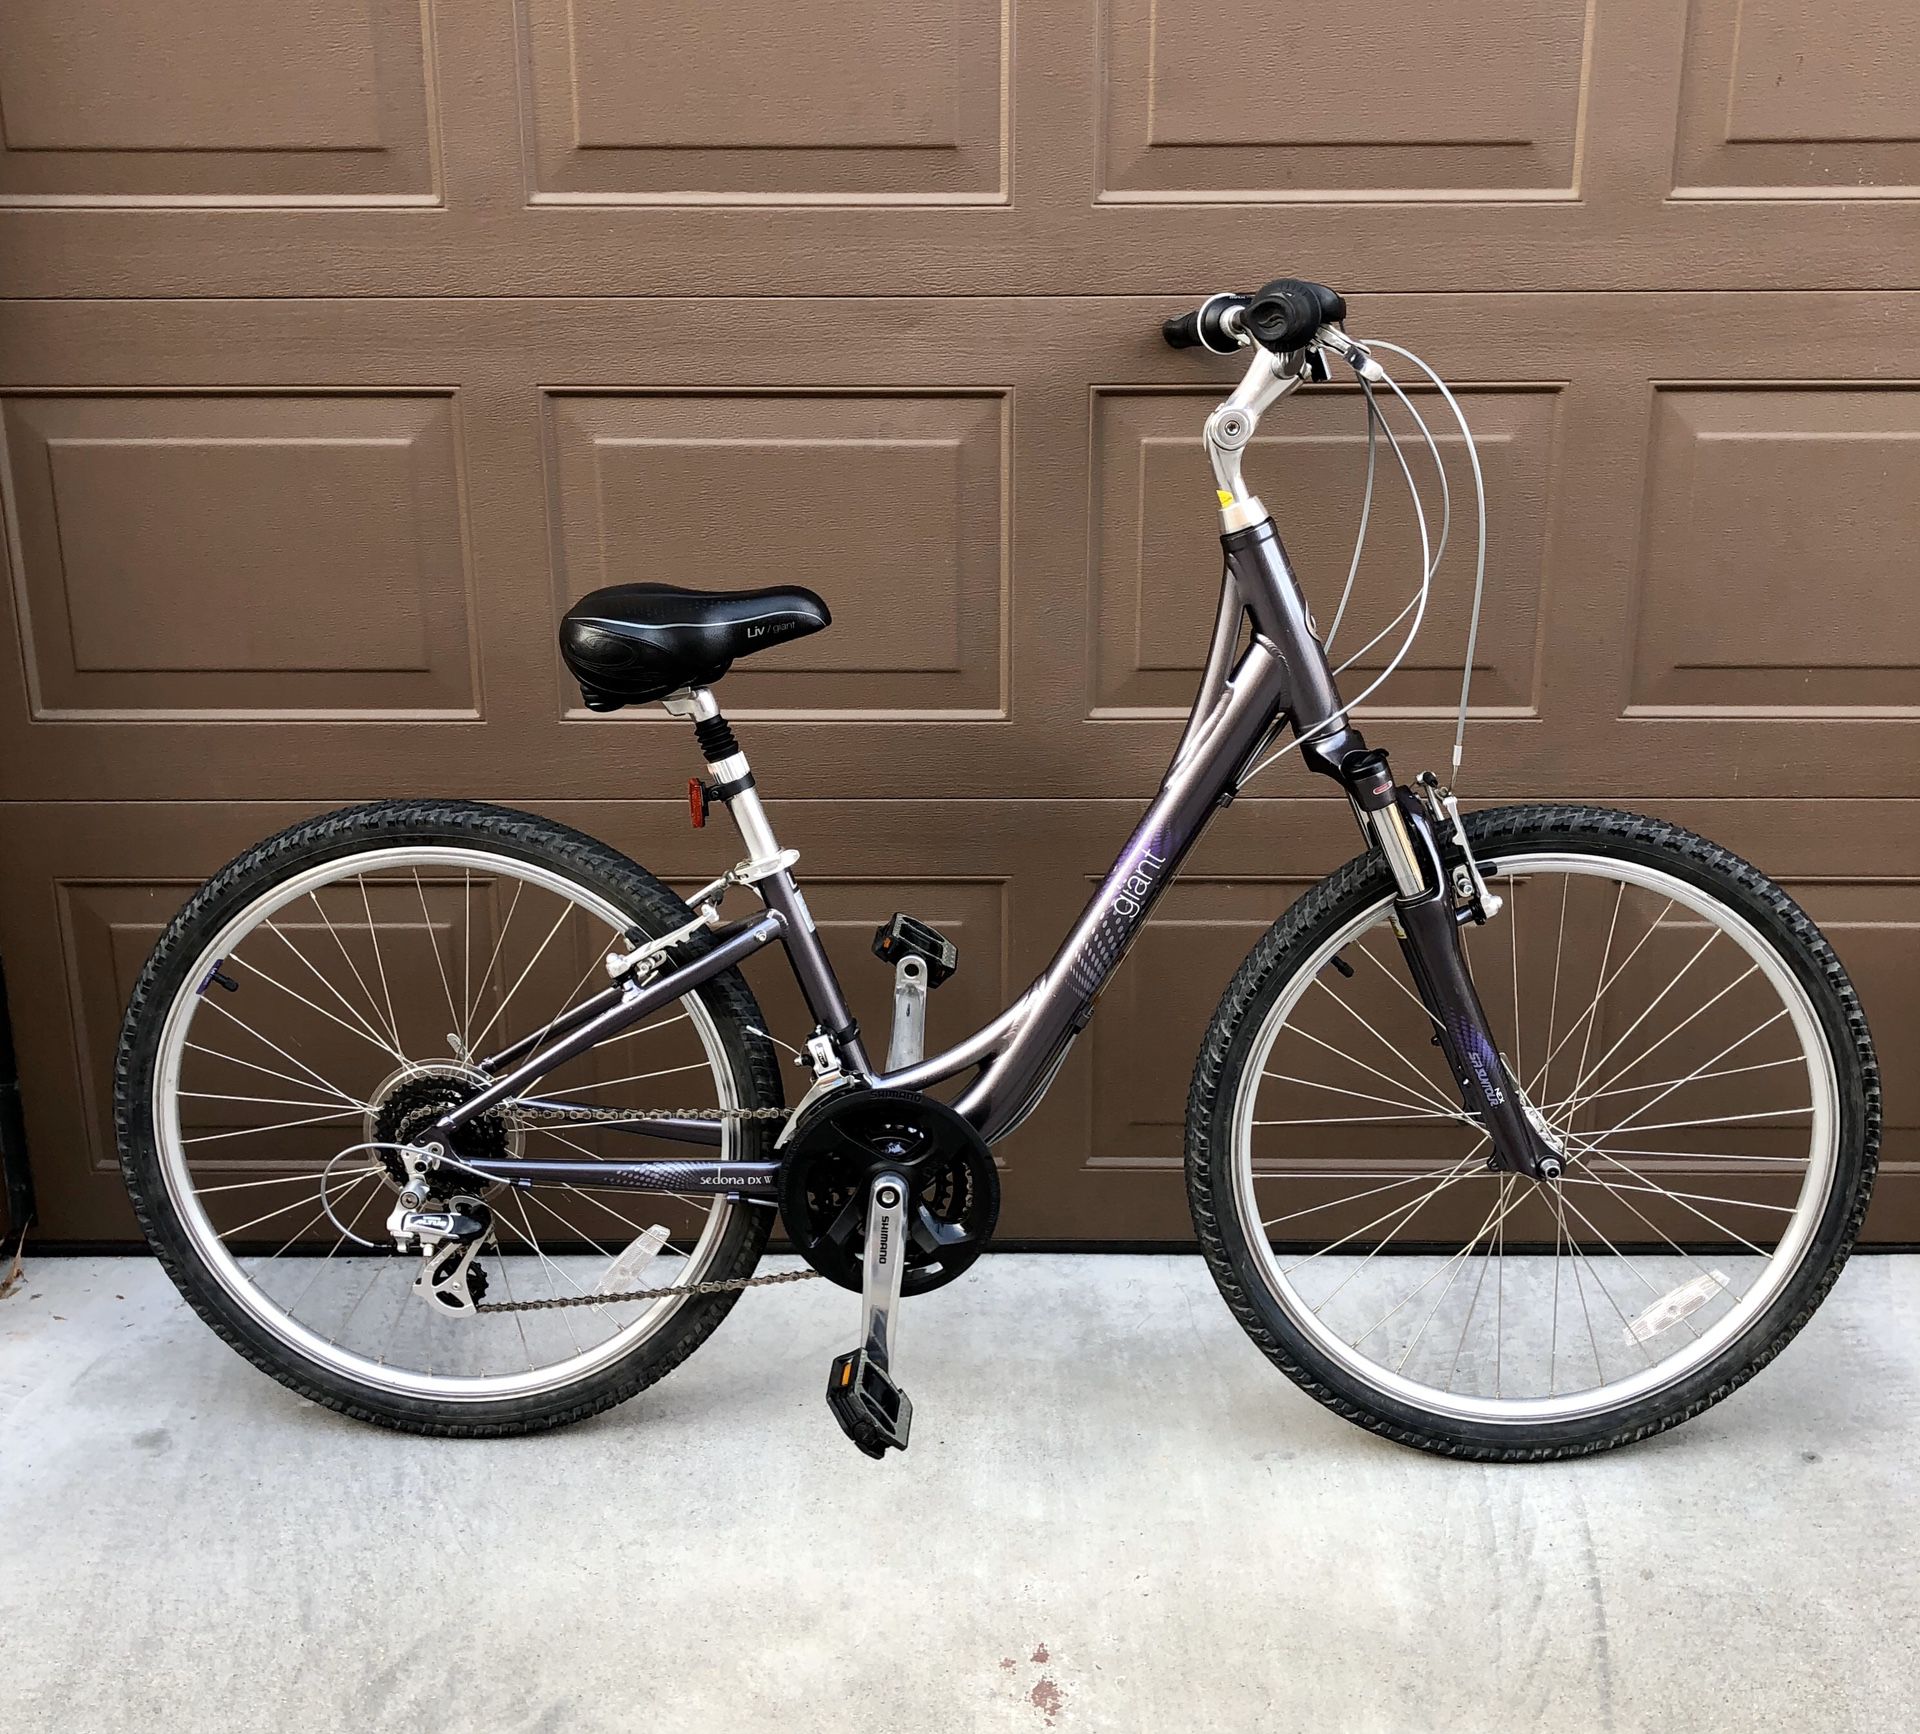 Giant Liv Sedona bike with front suspension